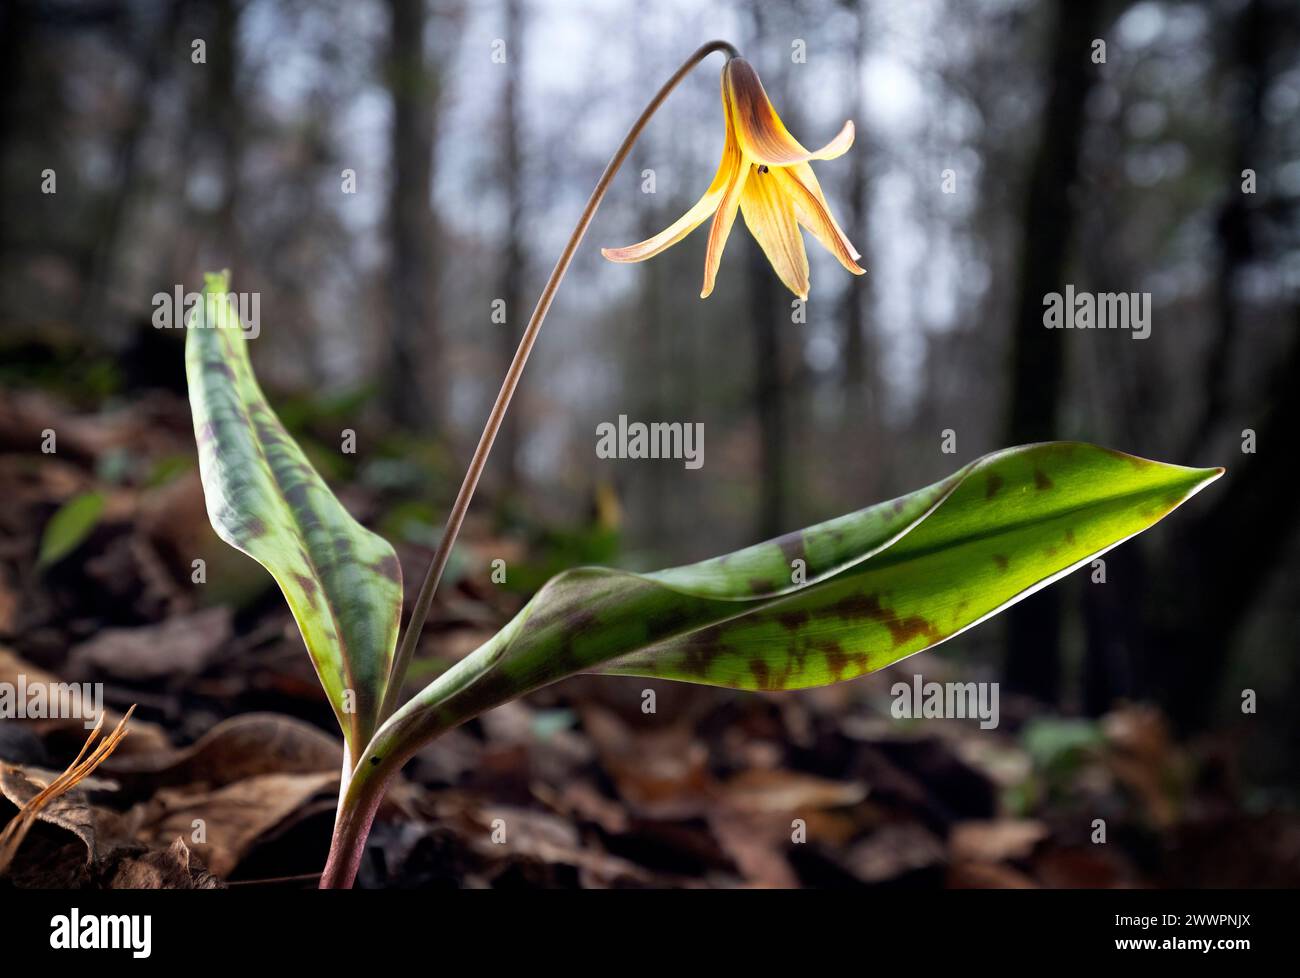 Trout Lily, Dog-Tooth Violet (Erythronium umbilicatum) - Pisgah National Forest, Brevard, North Carolina, USA [Shallow Depth of Field] Stock Photo